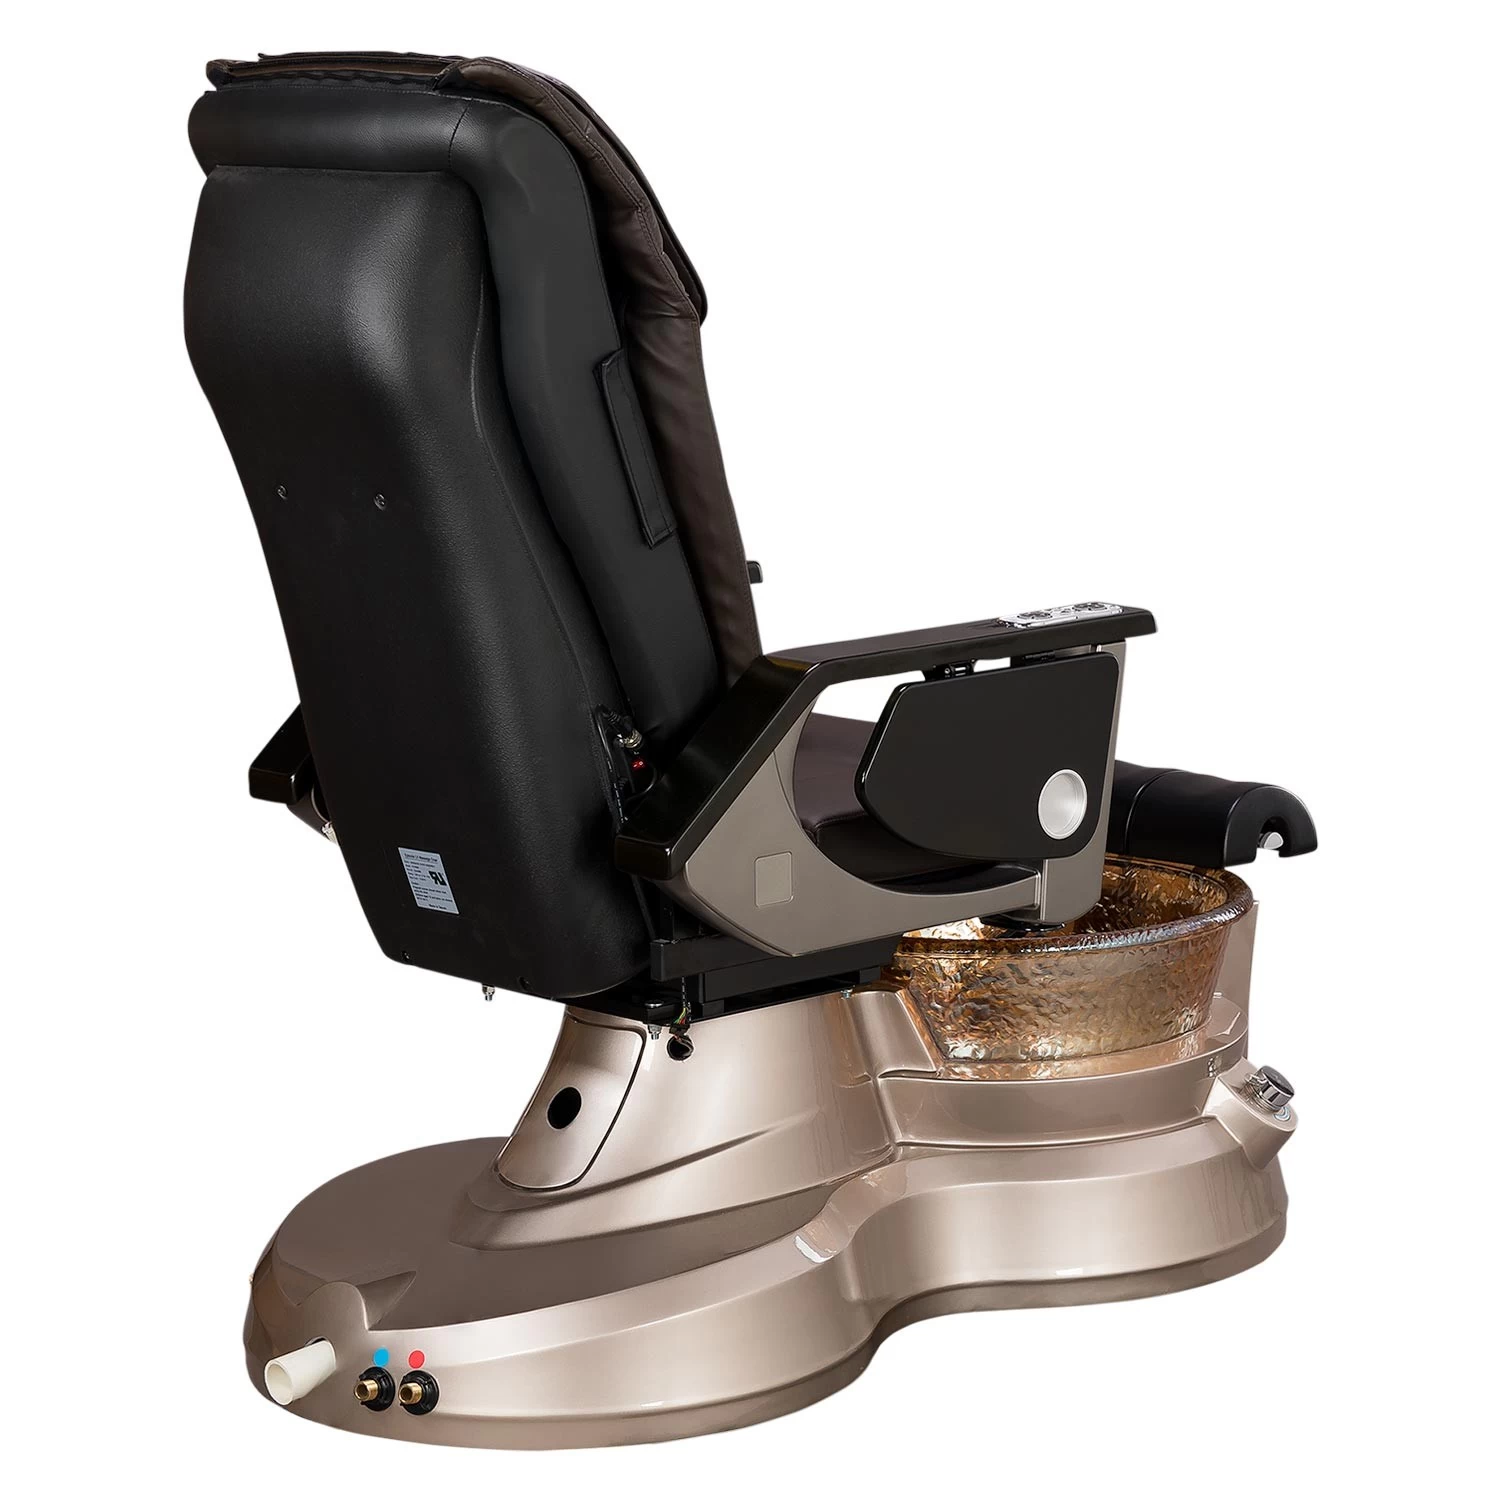 Top Selling Foot Spa Pedicure Chairs Nail Salon Furniture and Equipment